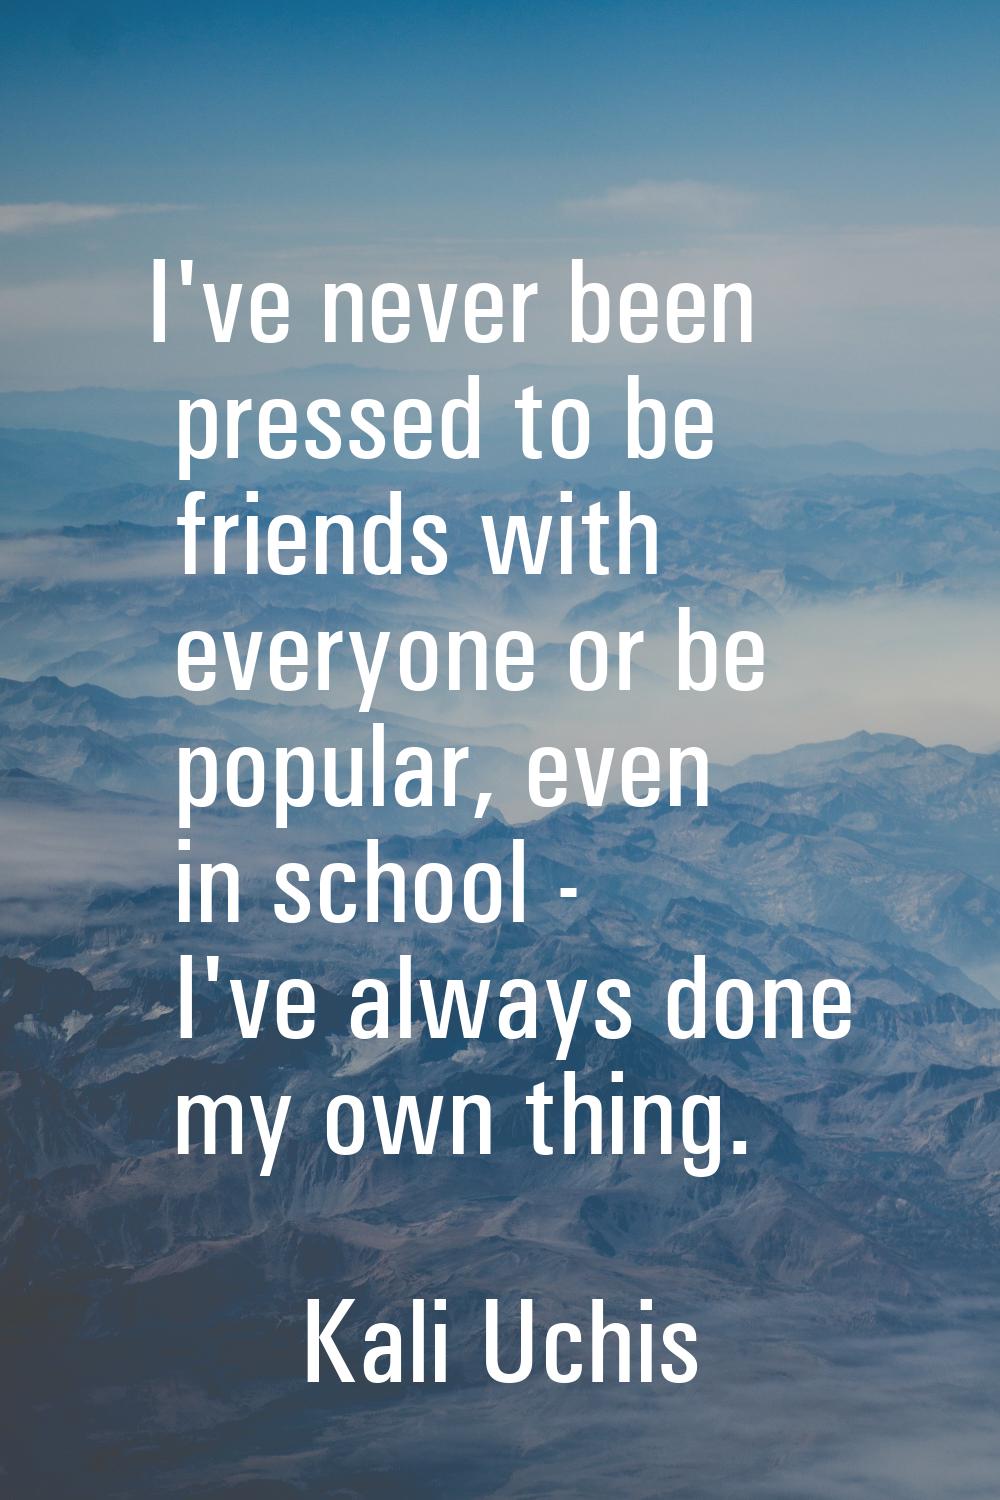 I've never been pressed to be friends with everyone or be popular, even in school - I've always don